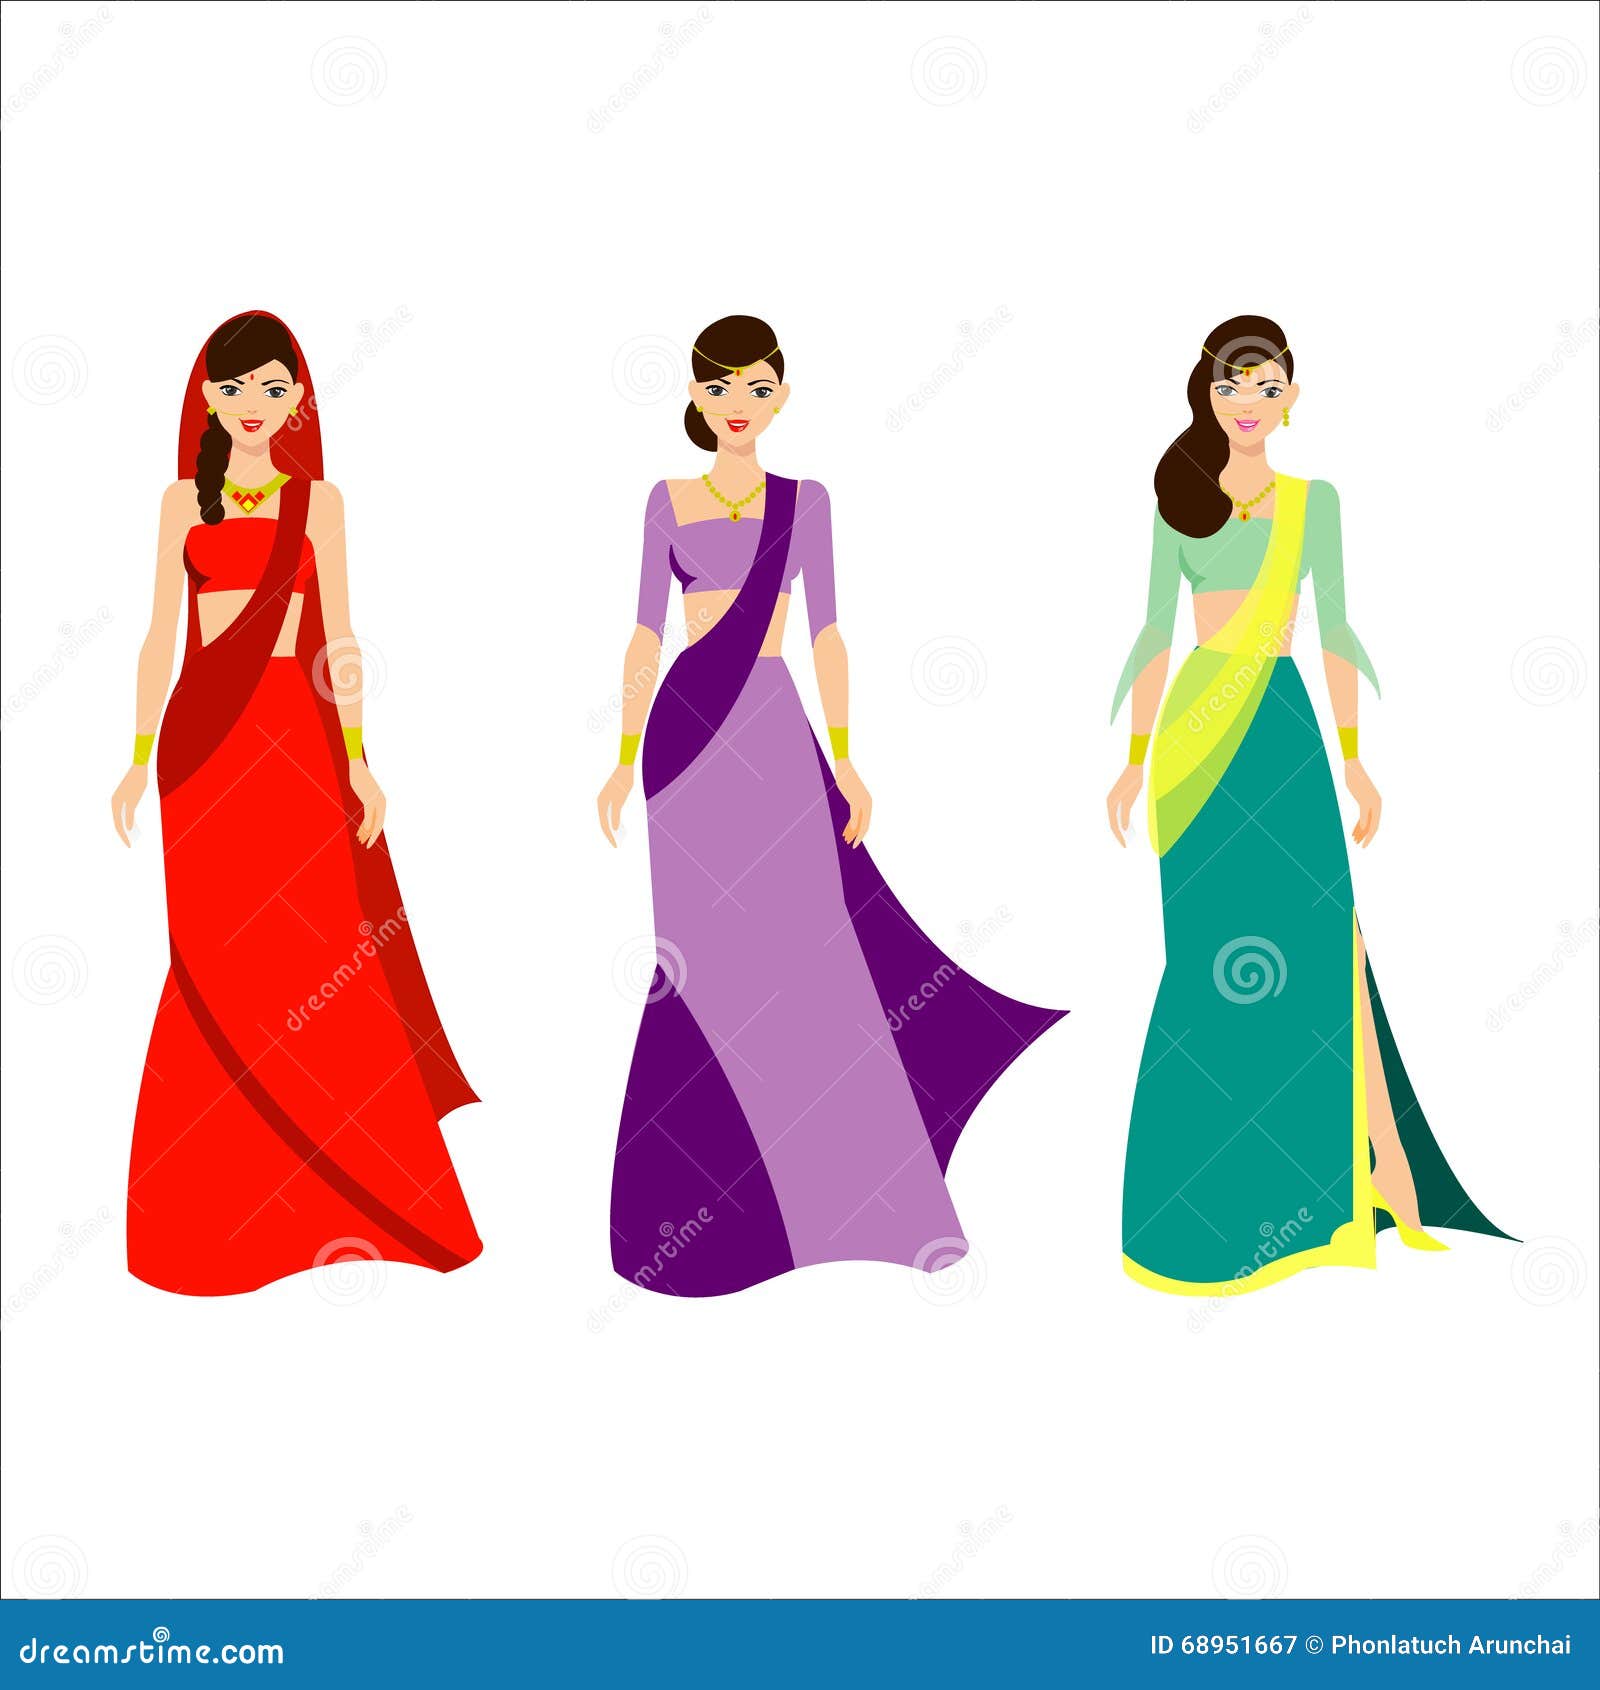 How to Draw a Girl with Beautiful Traditional dress | how to draw a  beautiful Indian woman - video Dailymotion